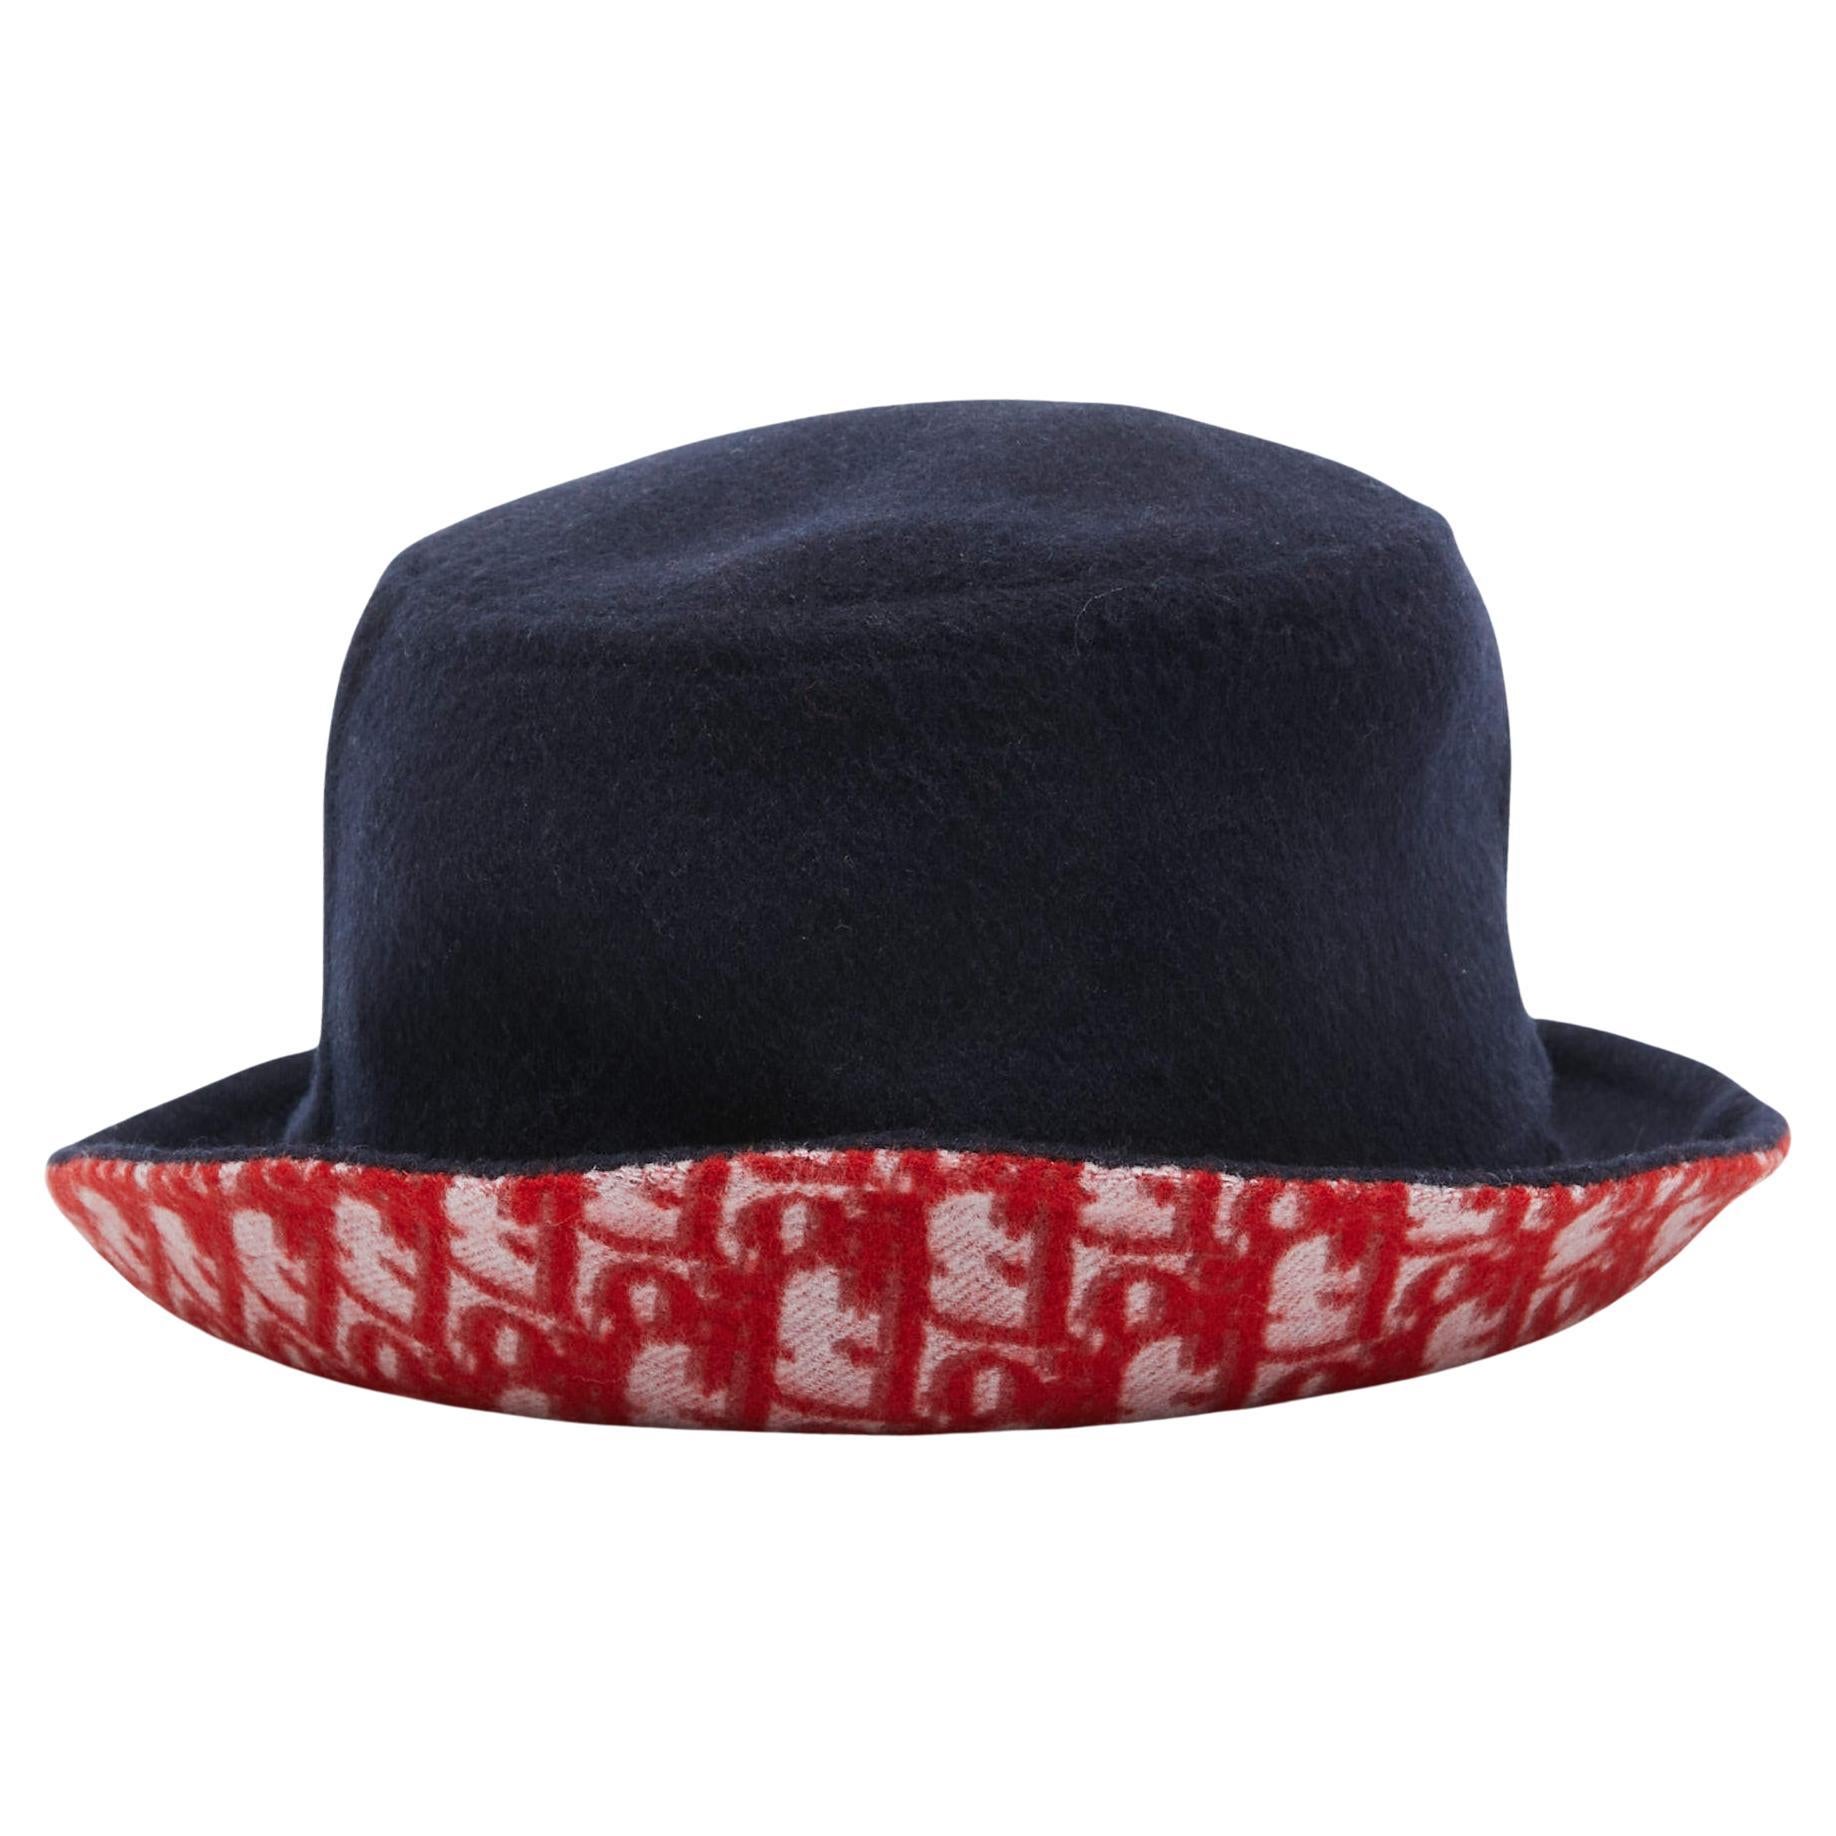 Dior Navy Blue/Red Oblique Wool Reversible Dior Chic Hat Size 57 For Sale